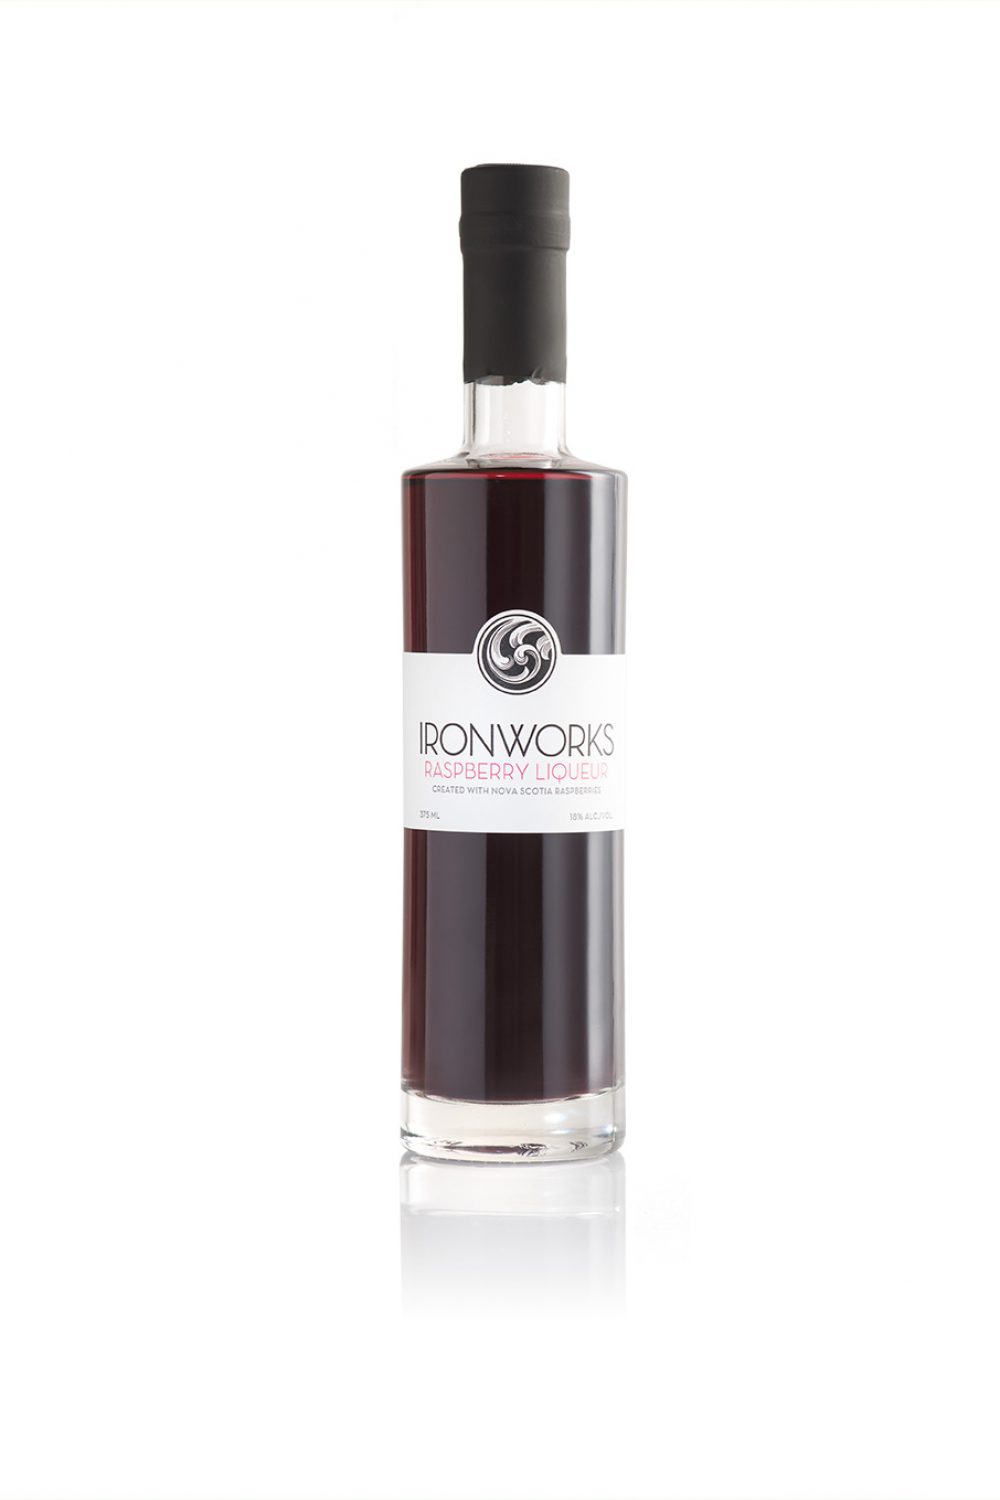 A product image for Ironworks Raspberry Liqueur